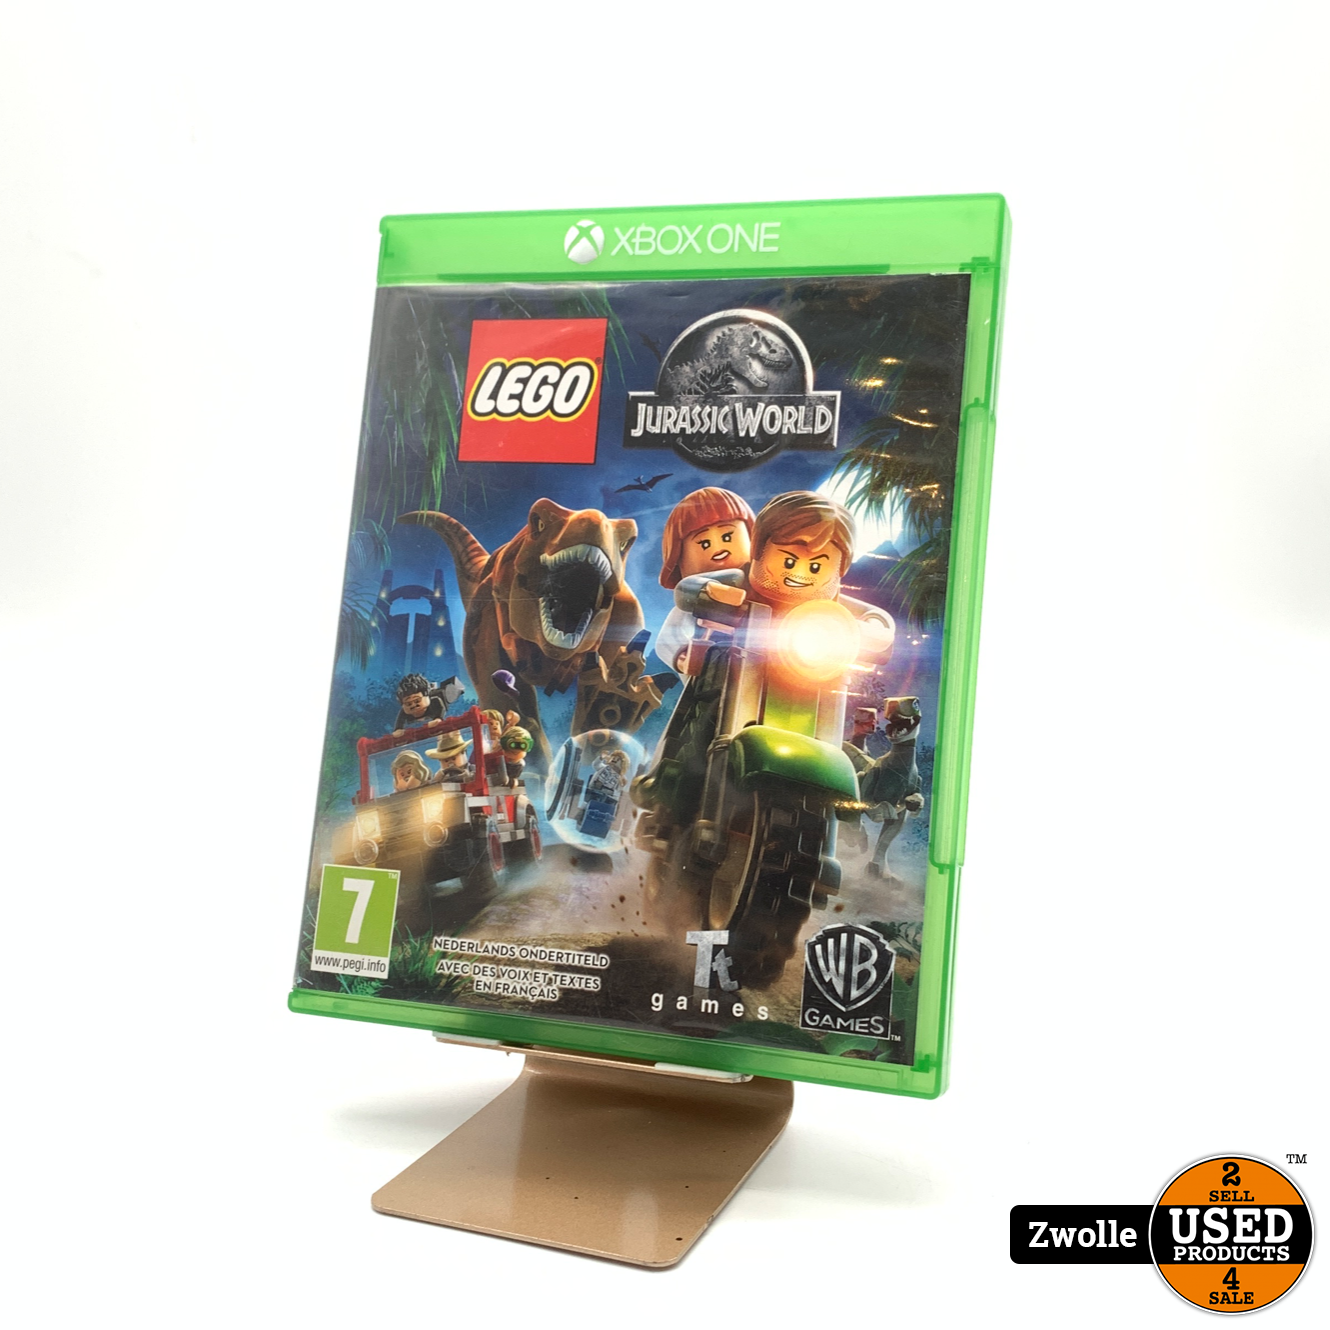 Verhandeling Tot ziens Contractie Xbox One Game | LEGO | Jurassic World - Used Products Zwolle